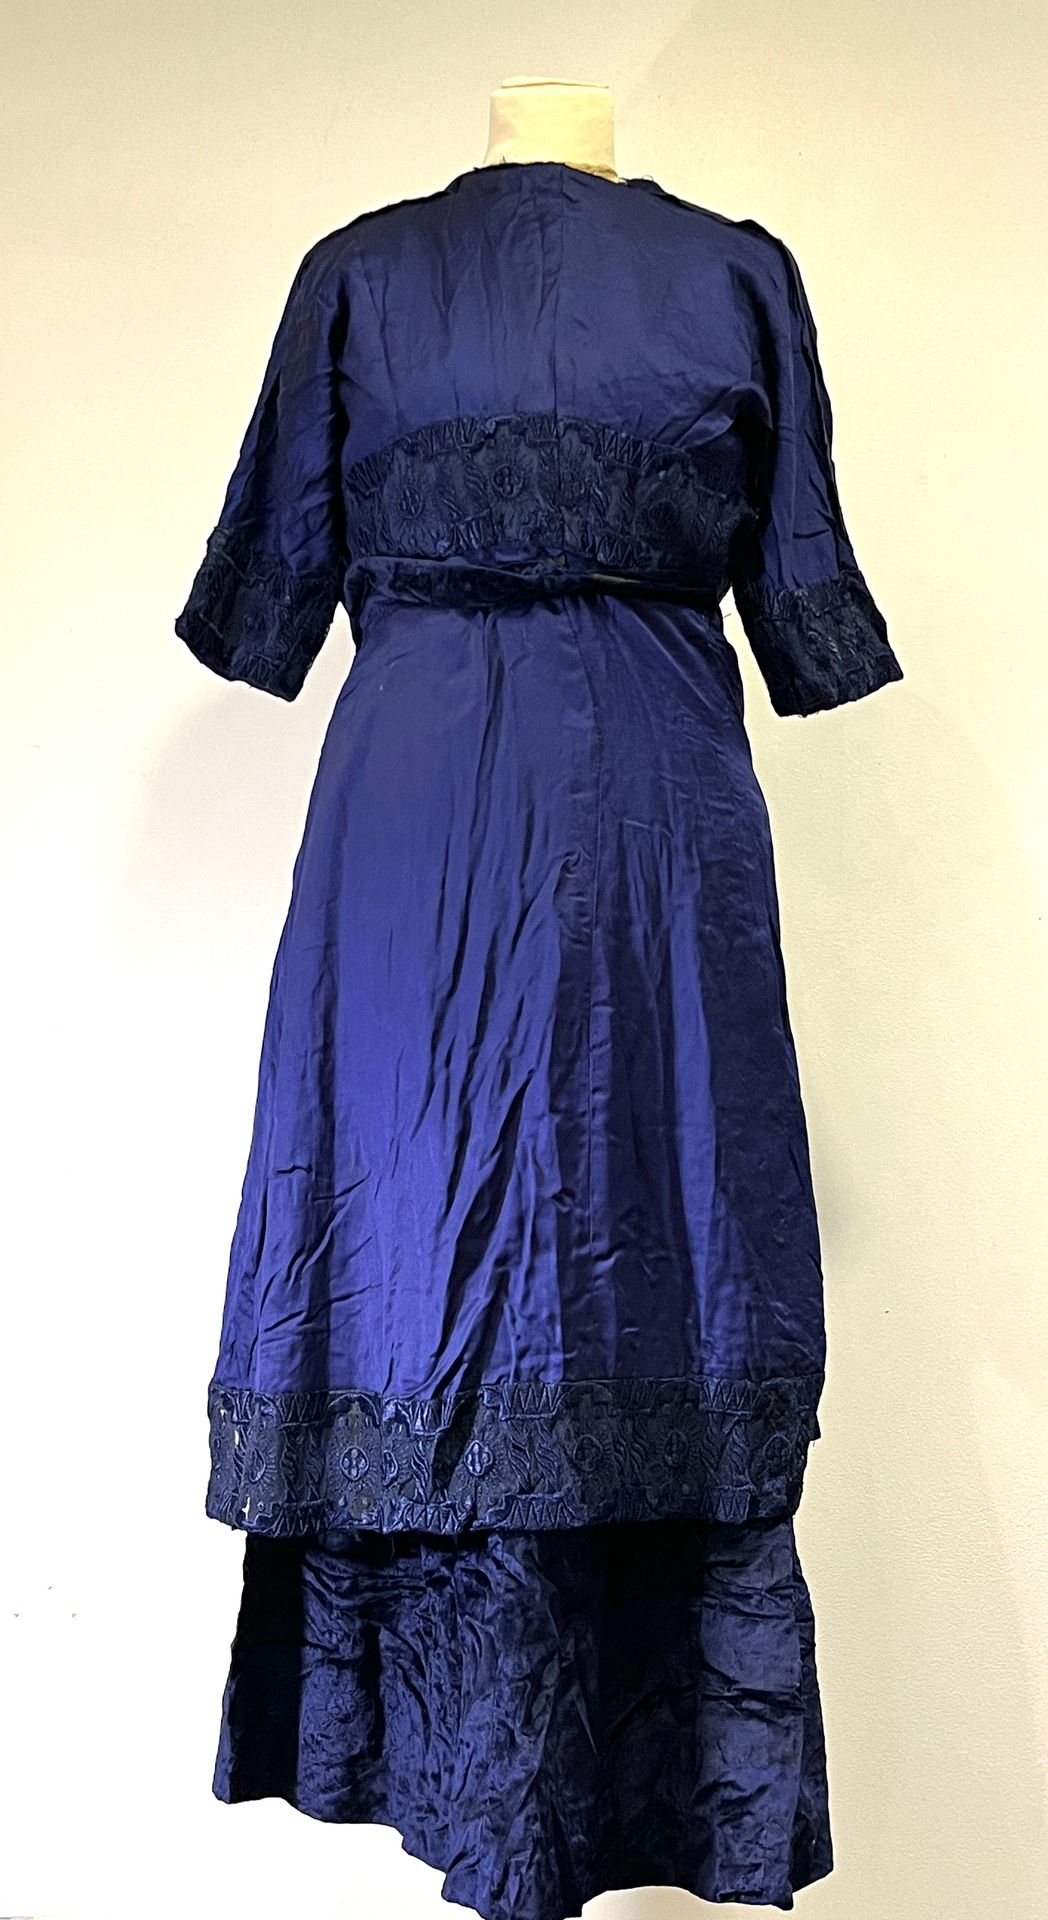 Null Day dress, in ink blue satin, bodice and skirt sewn together, decorated wit&hellip;